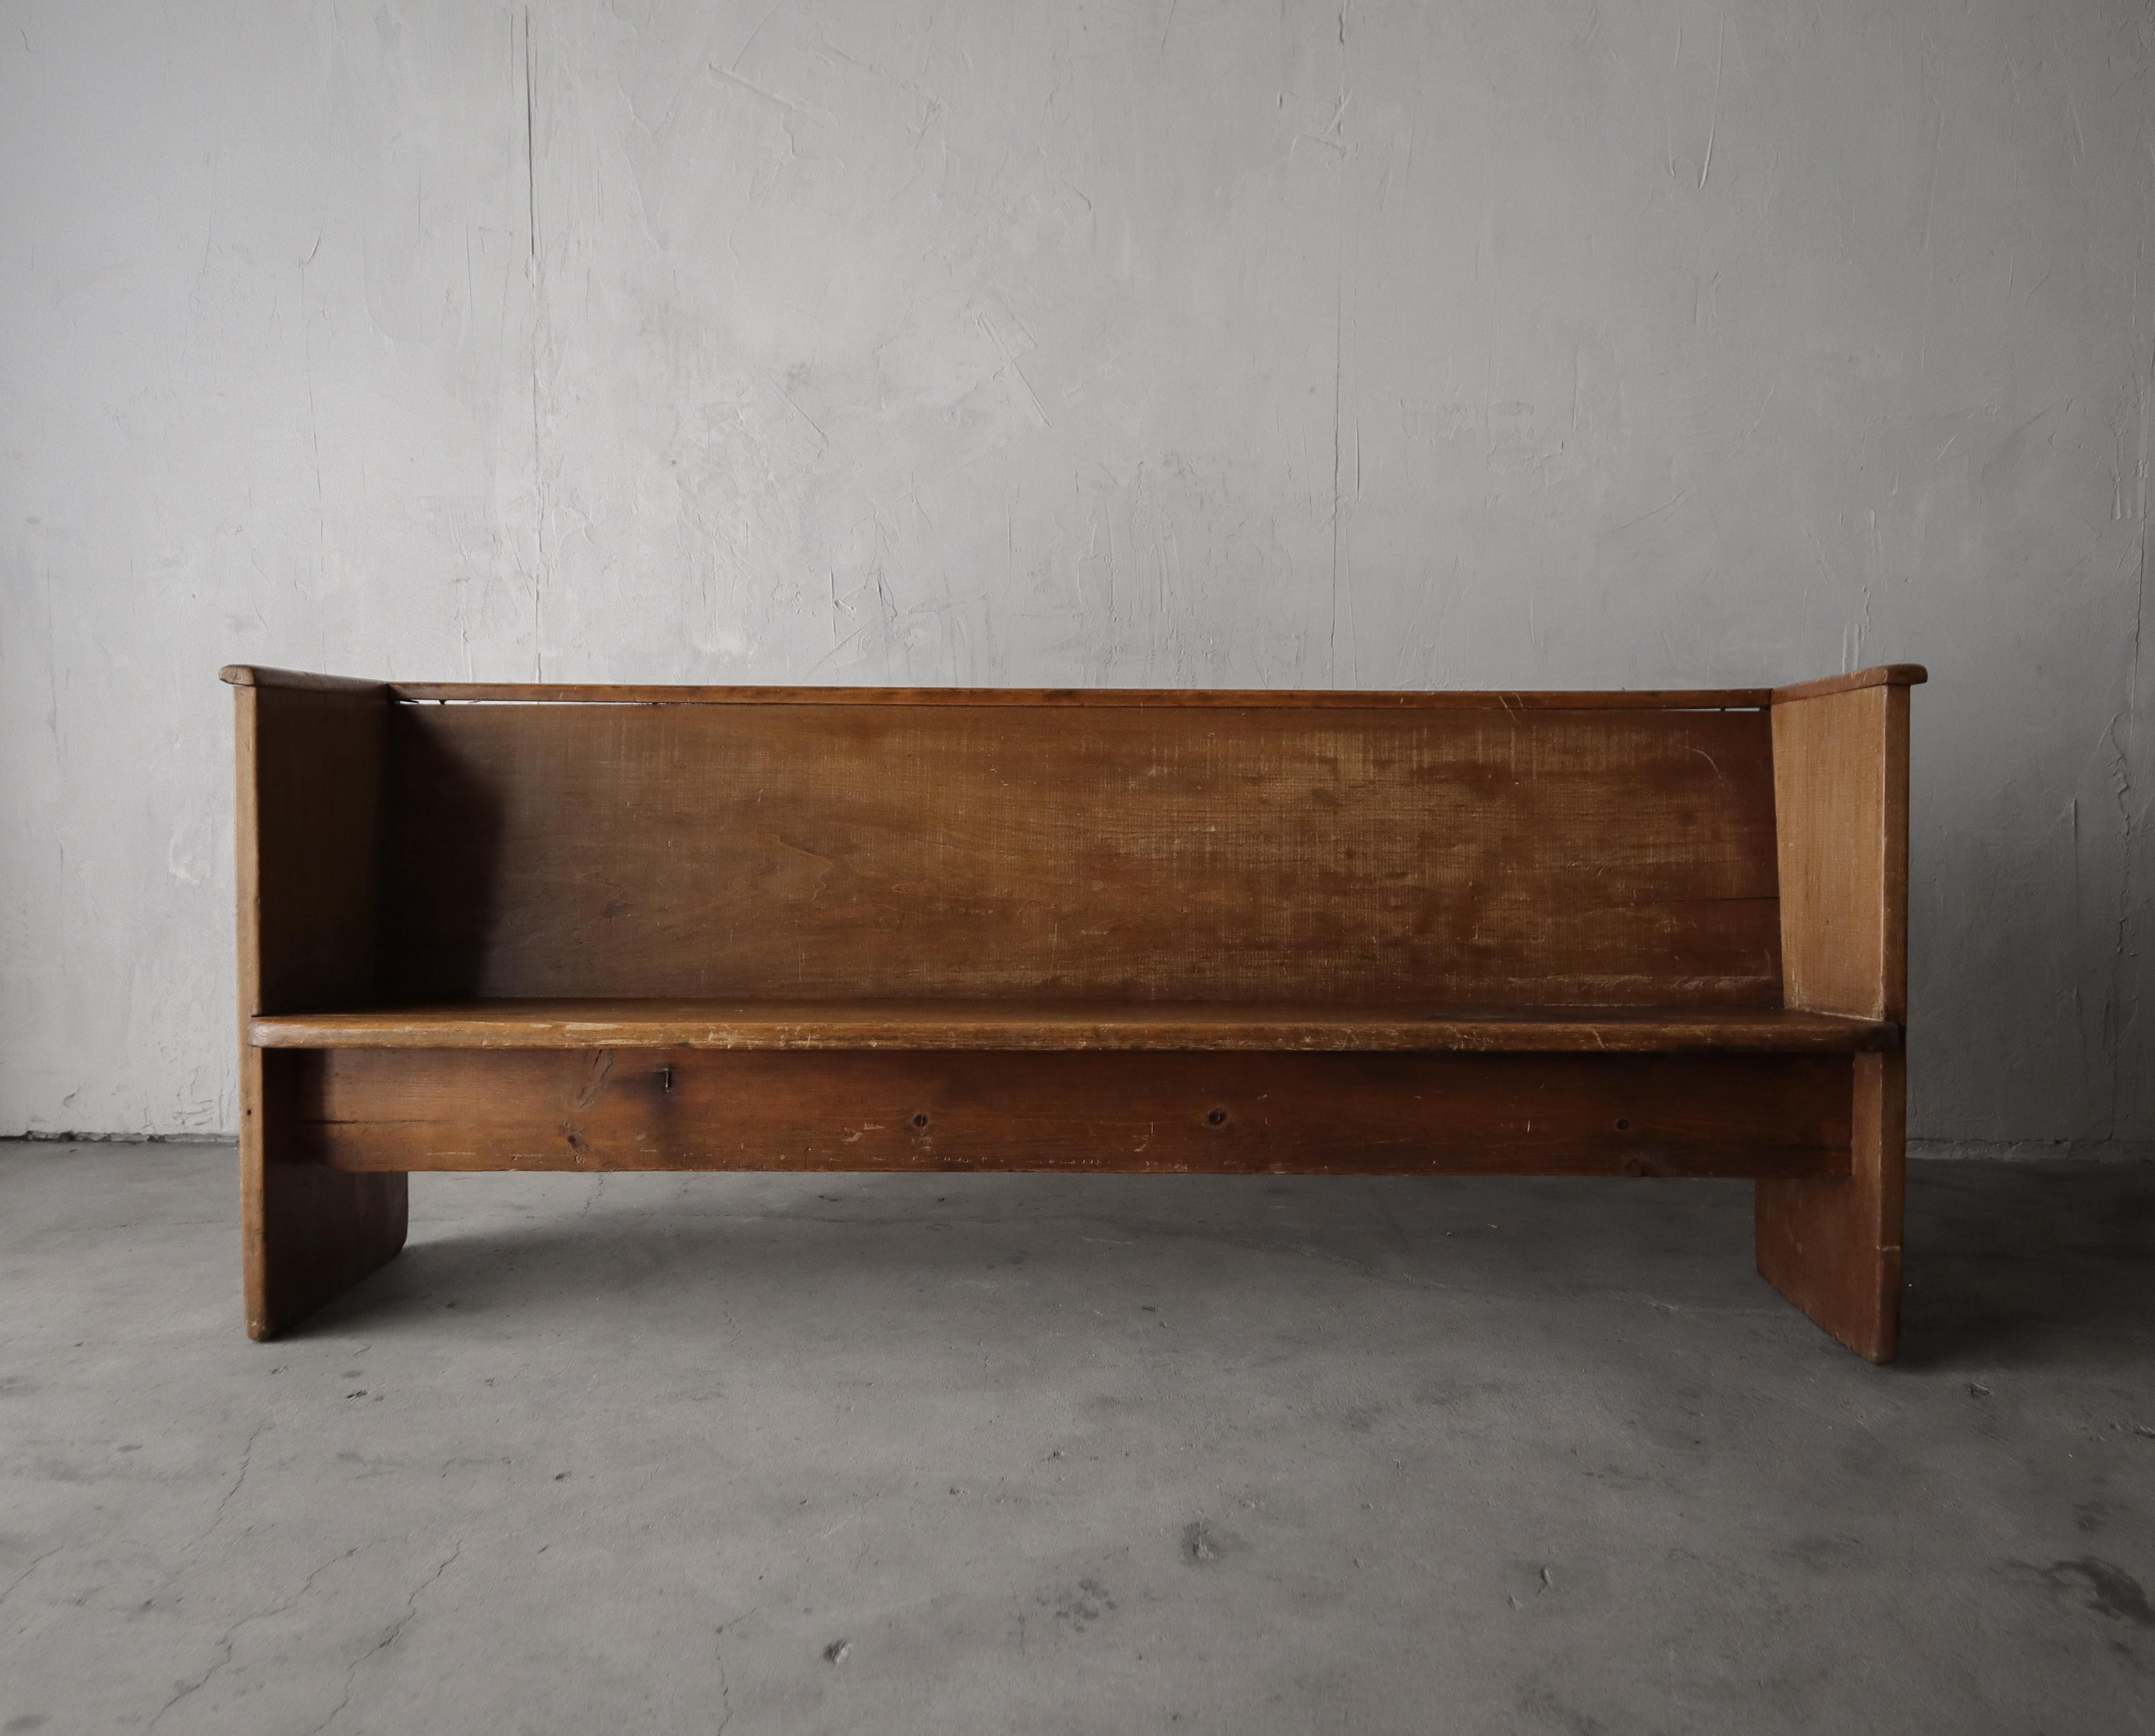 Beautiful handcrafted piece with beautiful patina. This antique bench has all the character a piece of this nature should.  I imagine it was used in an old church or schoolhouse.

The bench is long and narrow making it the perfect piece for an entry